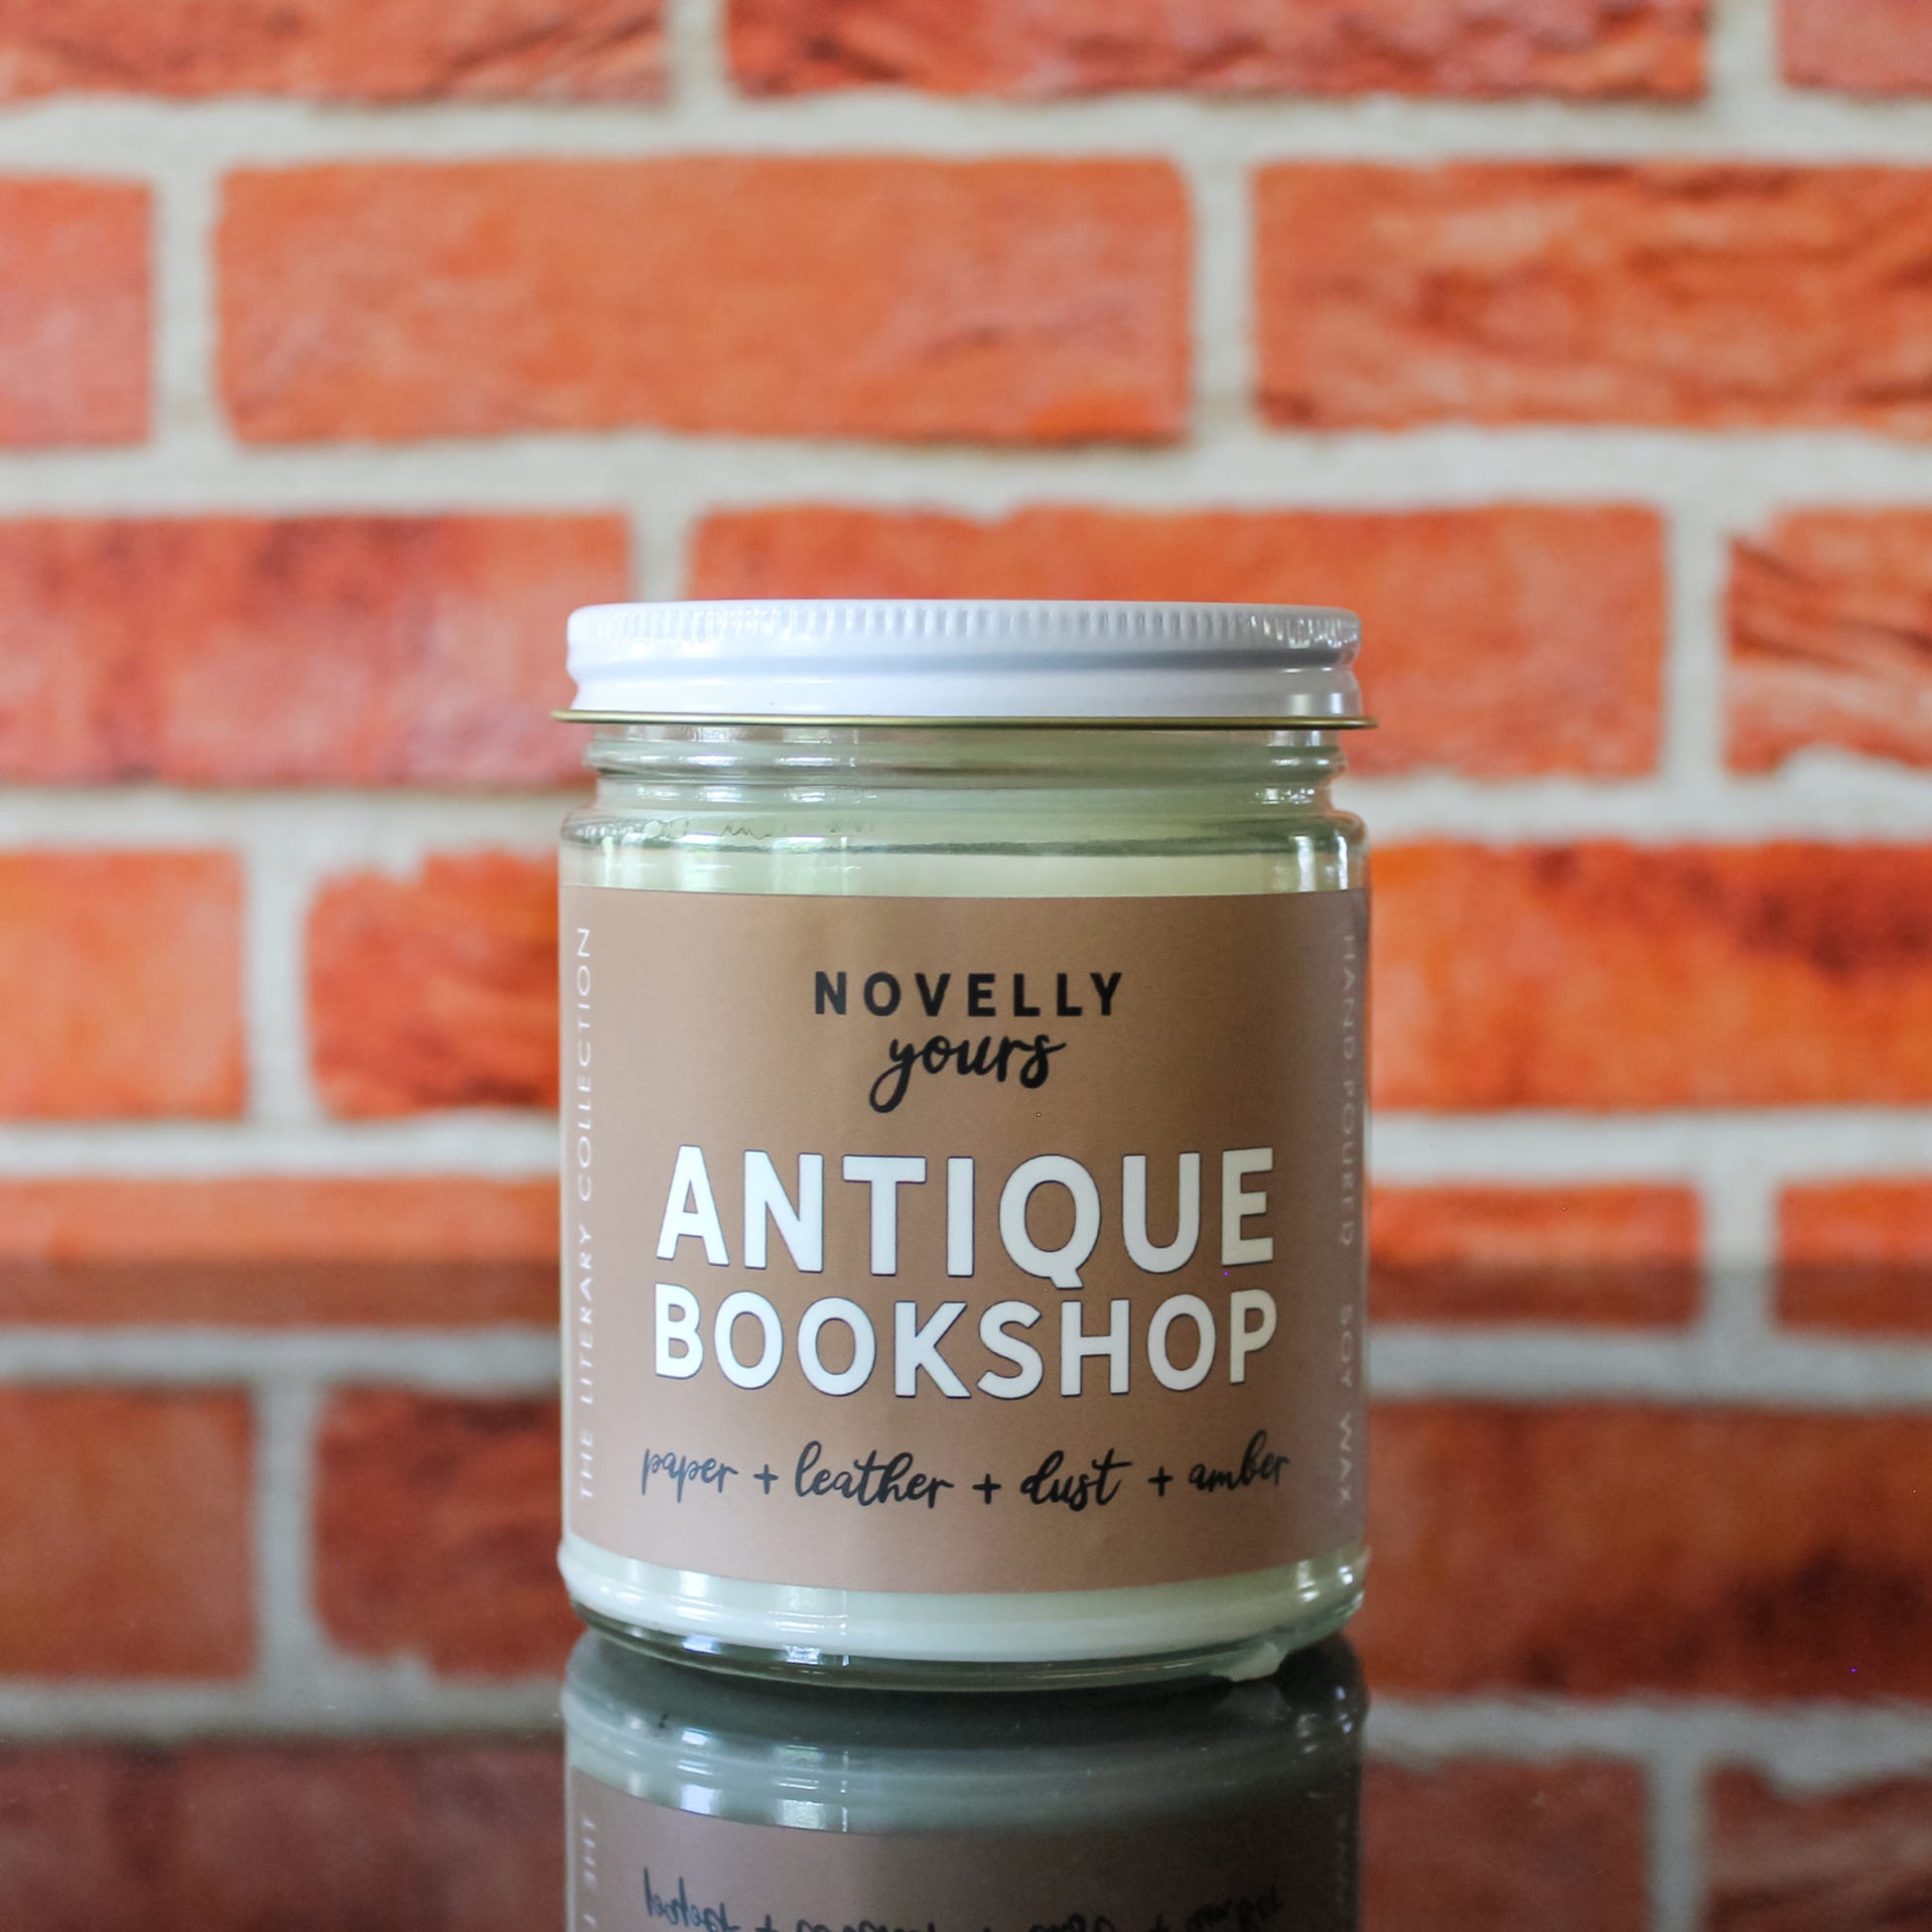 book inspired candle "Antique Bookshop" with beige label sits in front of red brick background